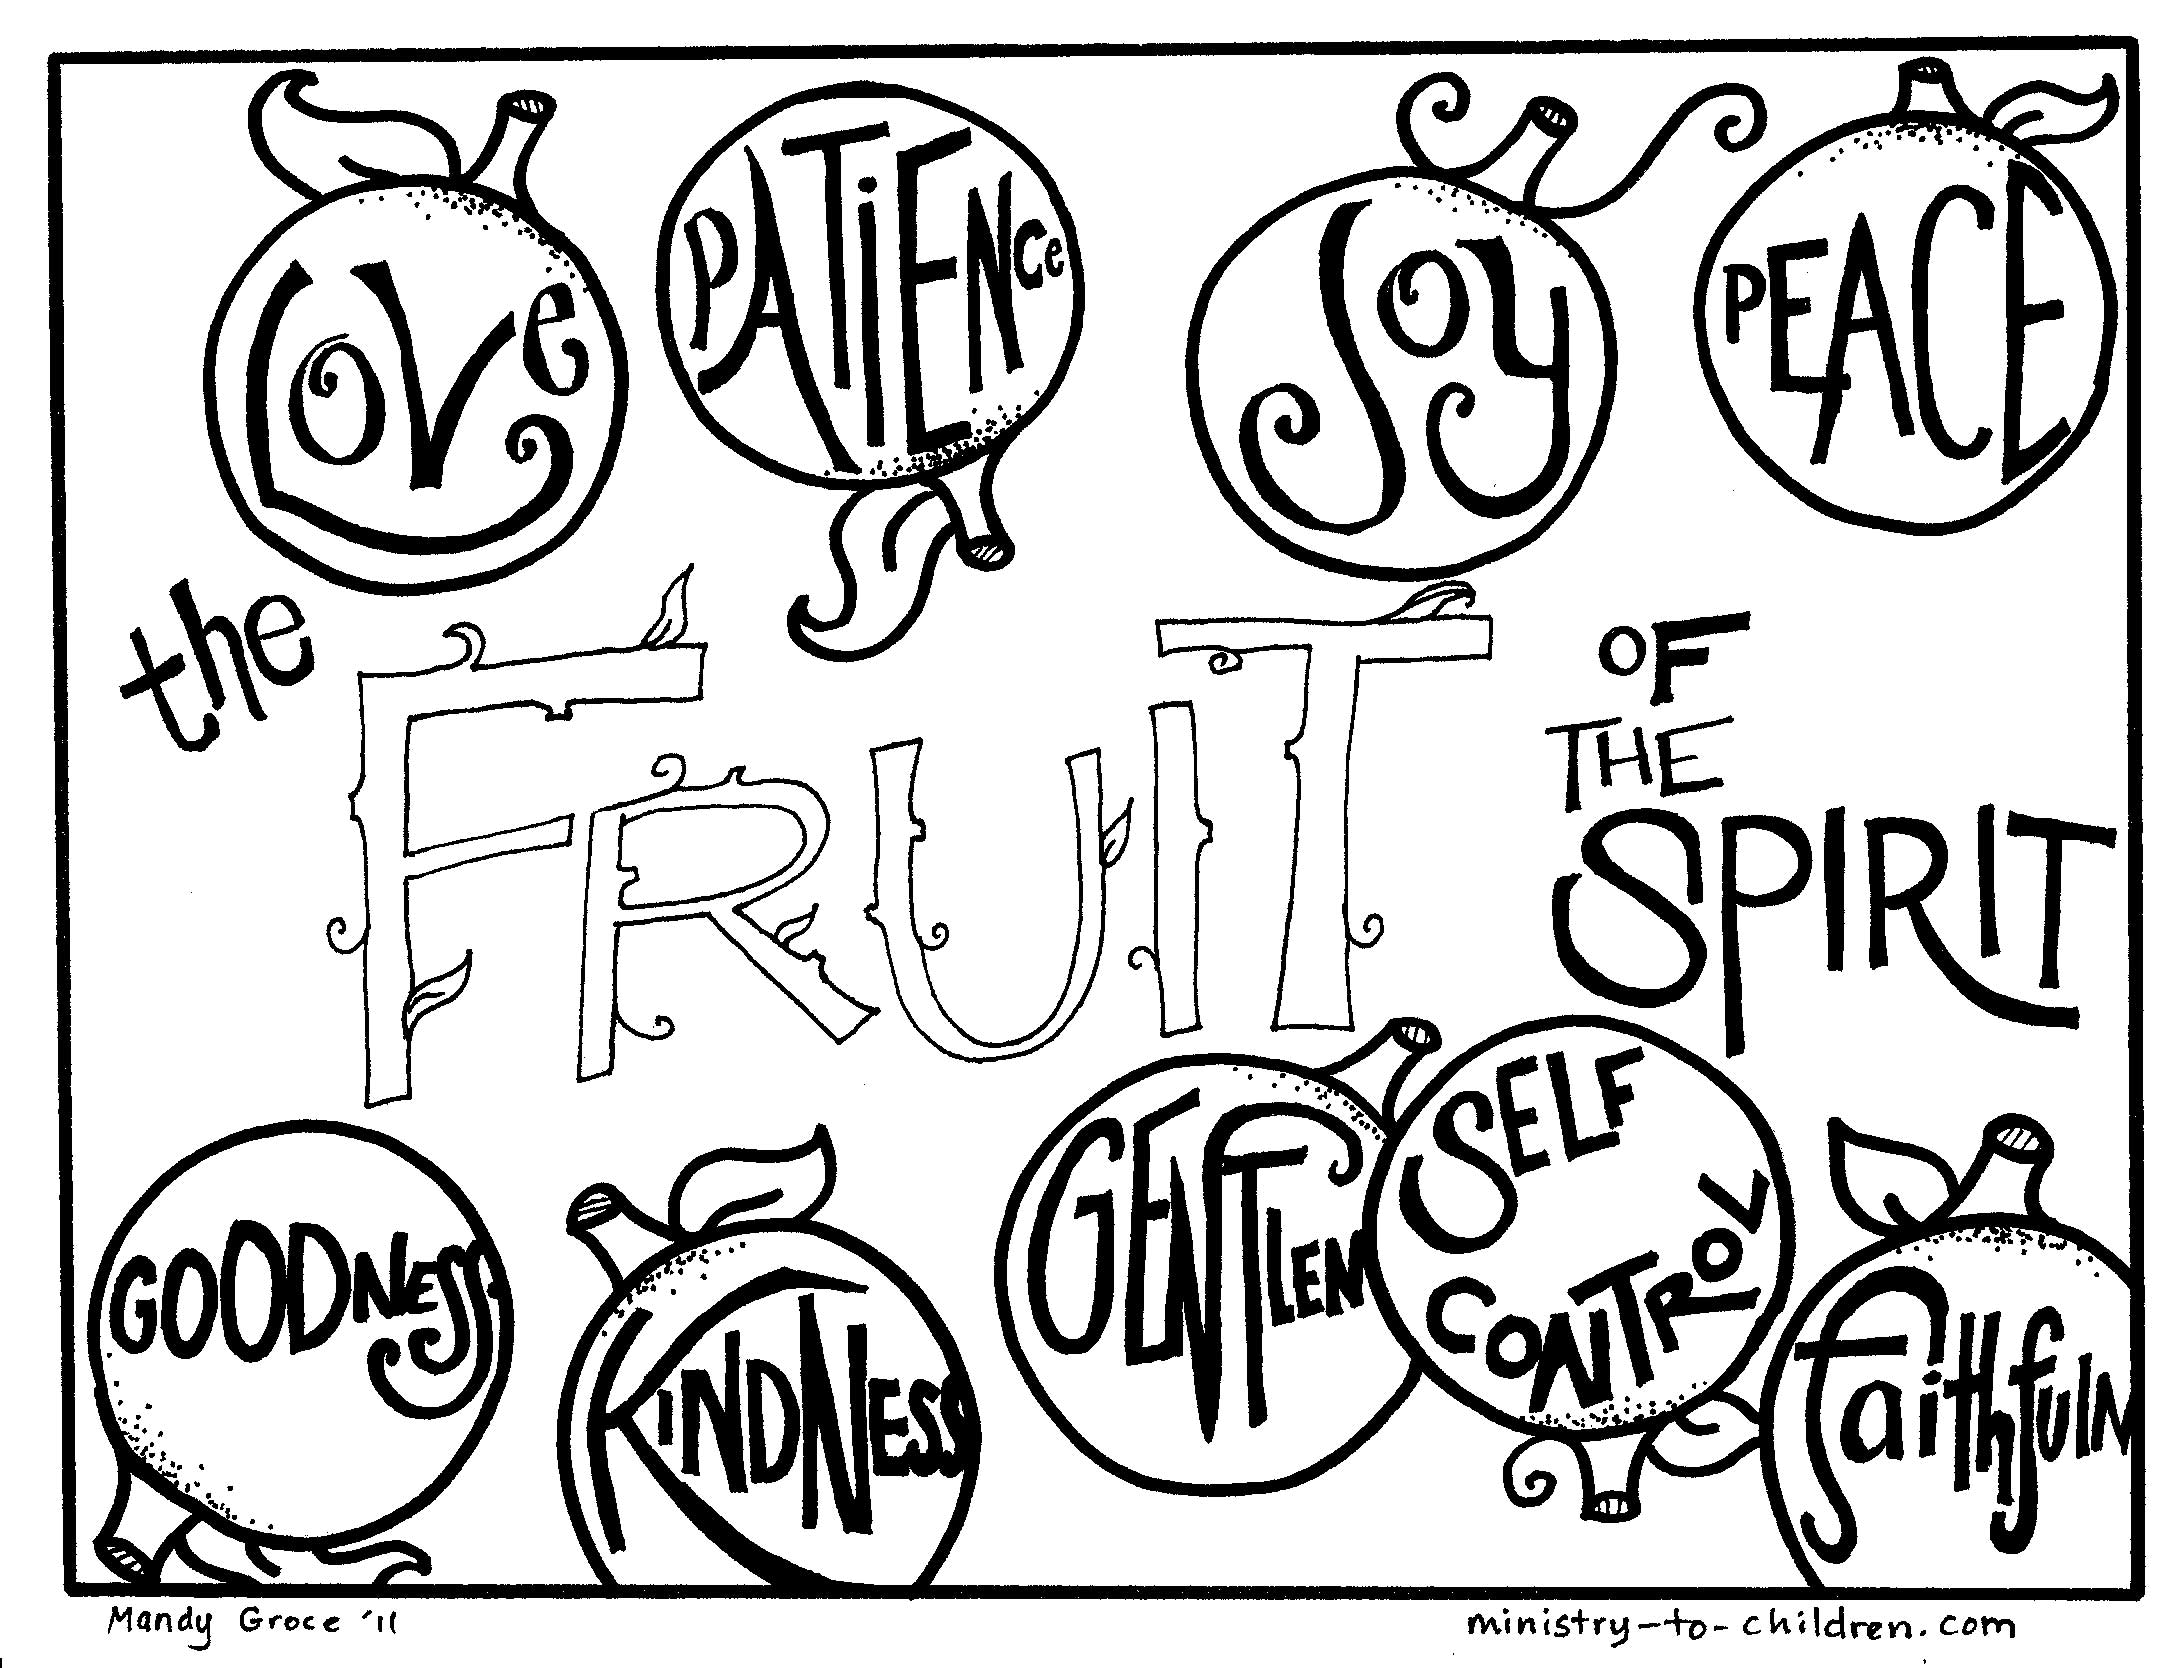 Bible Fruit of the Spirit Coloring Pages Printable Image